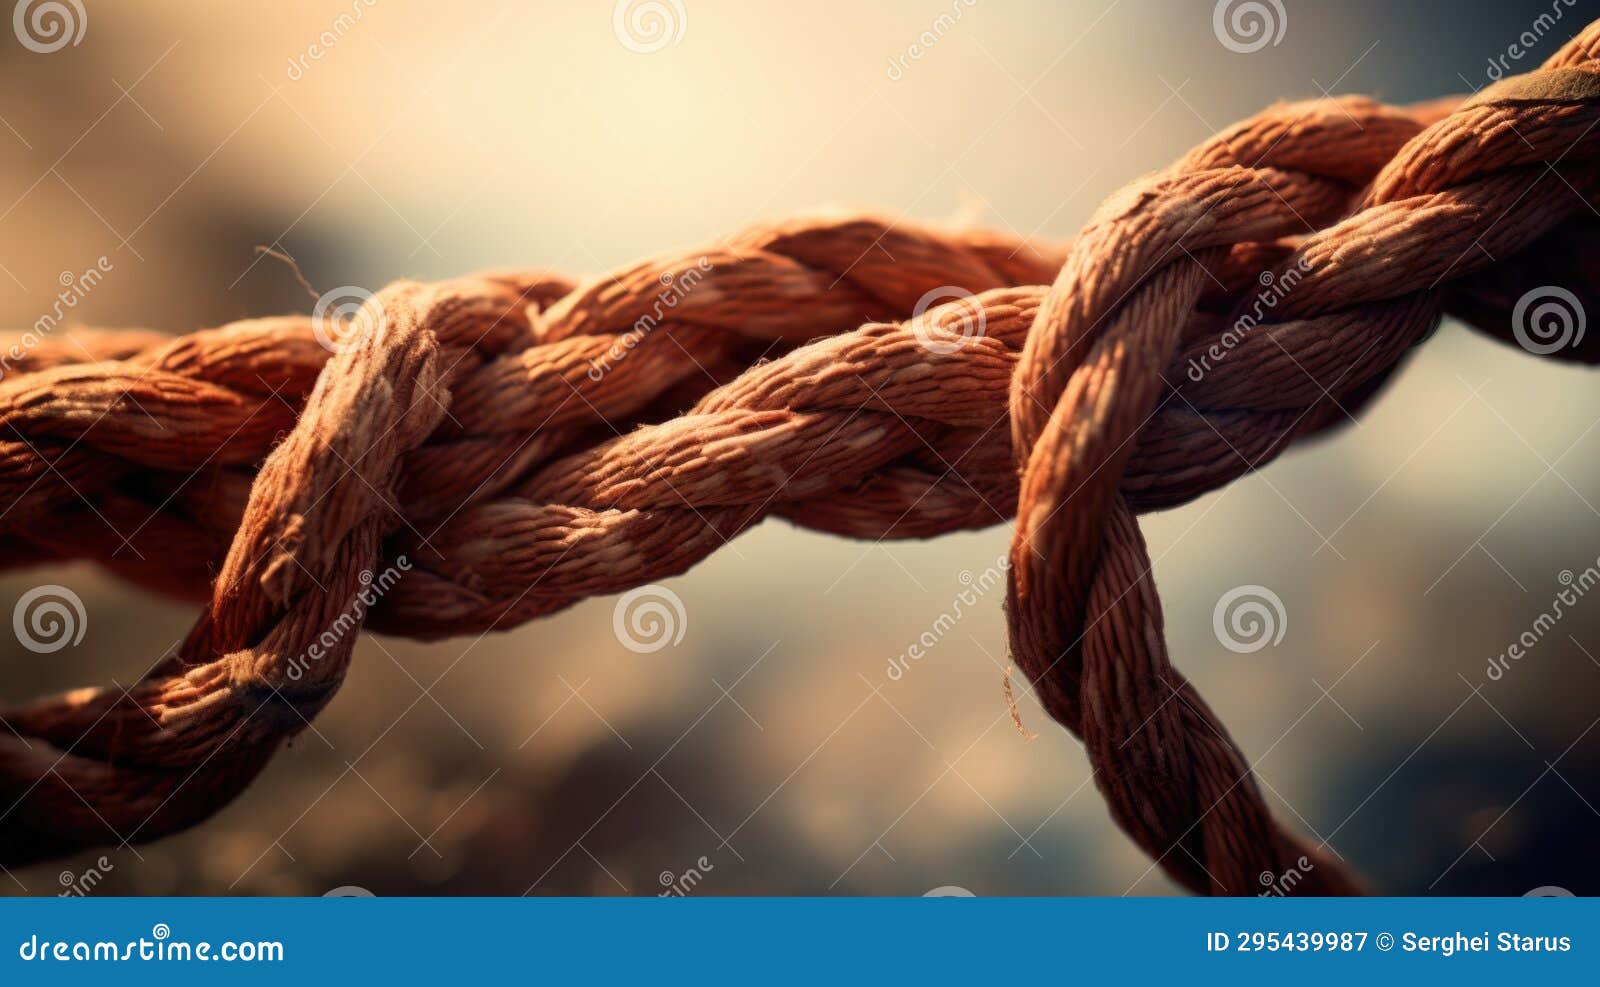 34 Rope Tied To Tree Stock Illustrations, Vectors & Clipart - Dreamstime